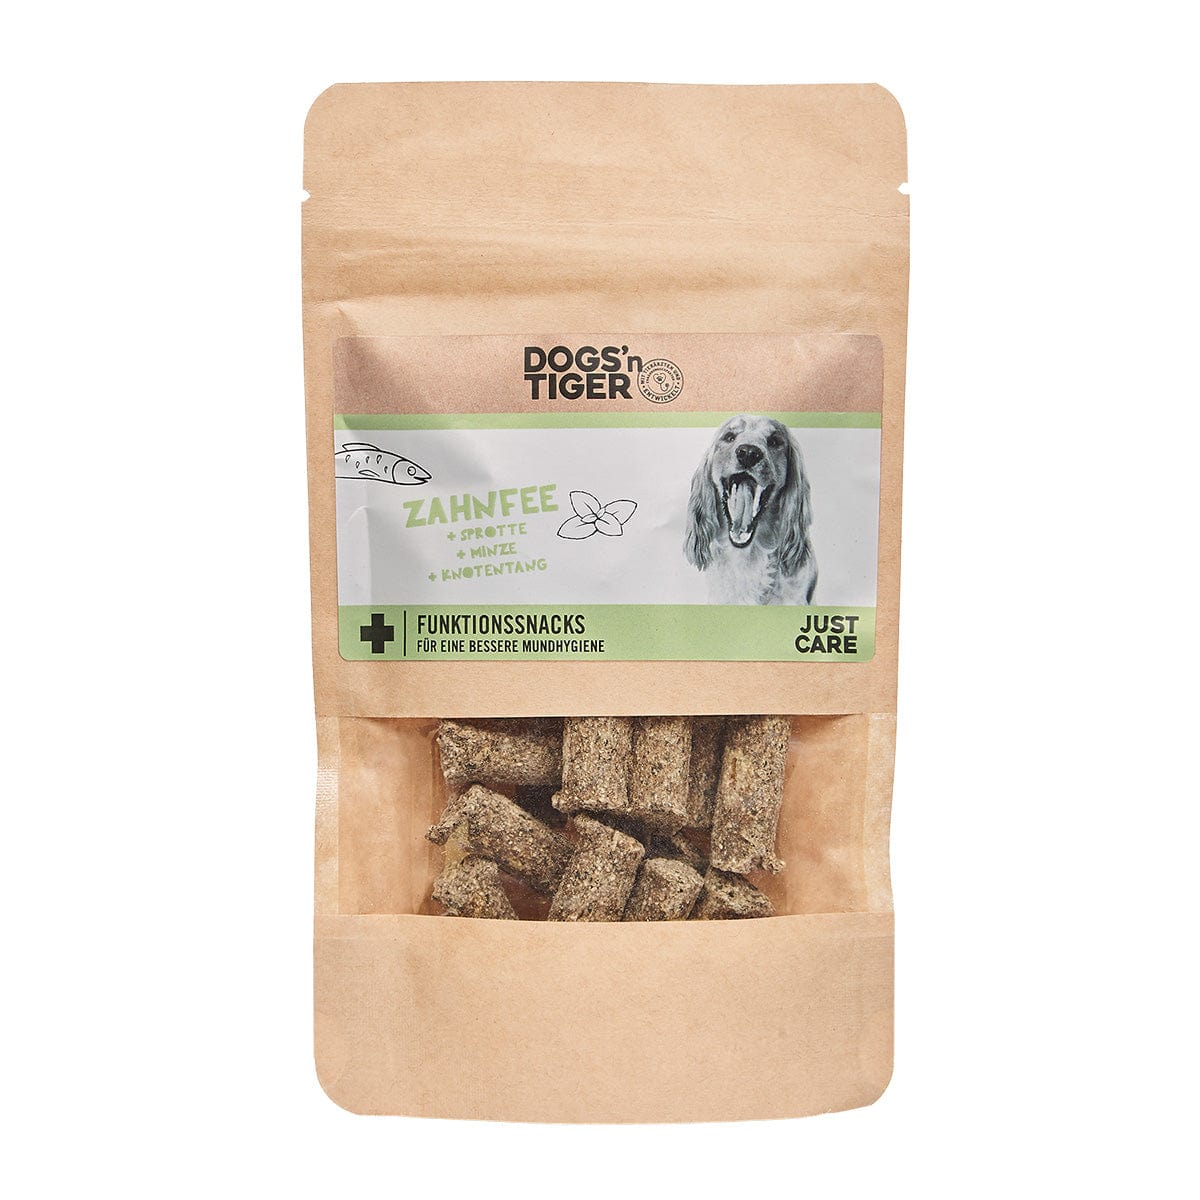 Packung Dogs'n Tiger Zahnfee Funktionssnack für Hunde